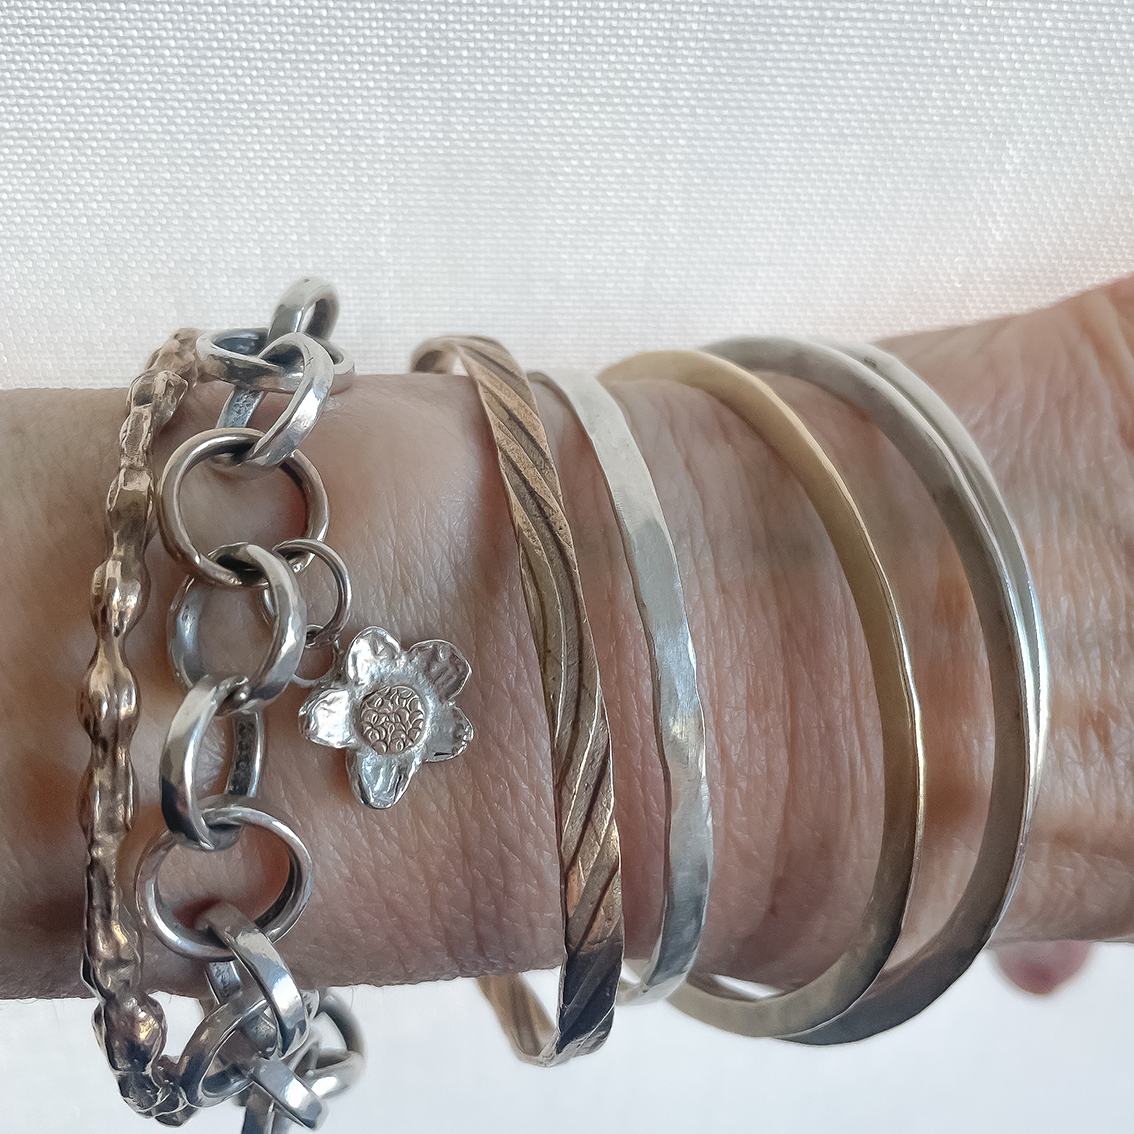 Arm showing a collection of Bangles and Chains in Silver, Gold and Bronze